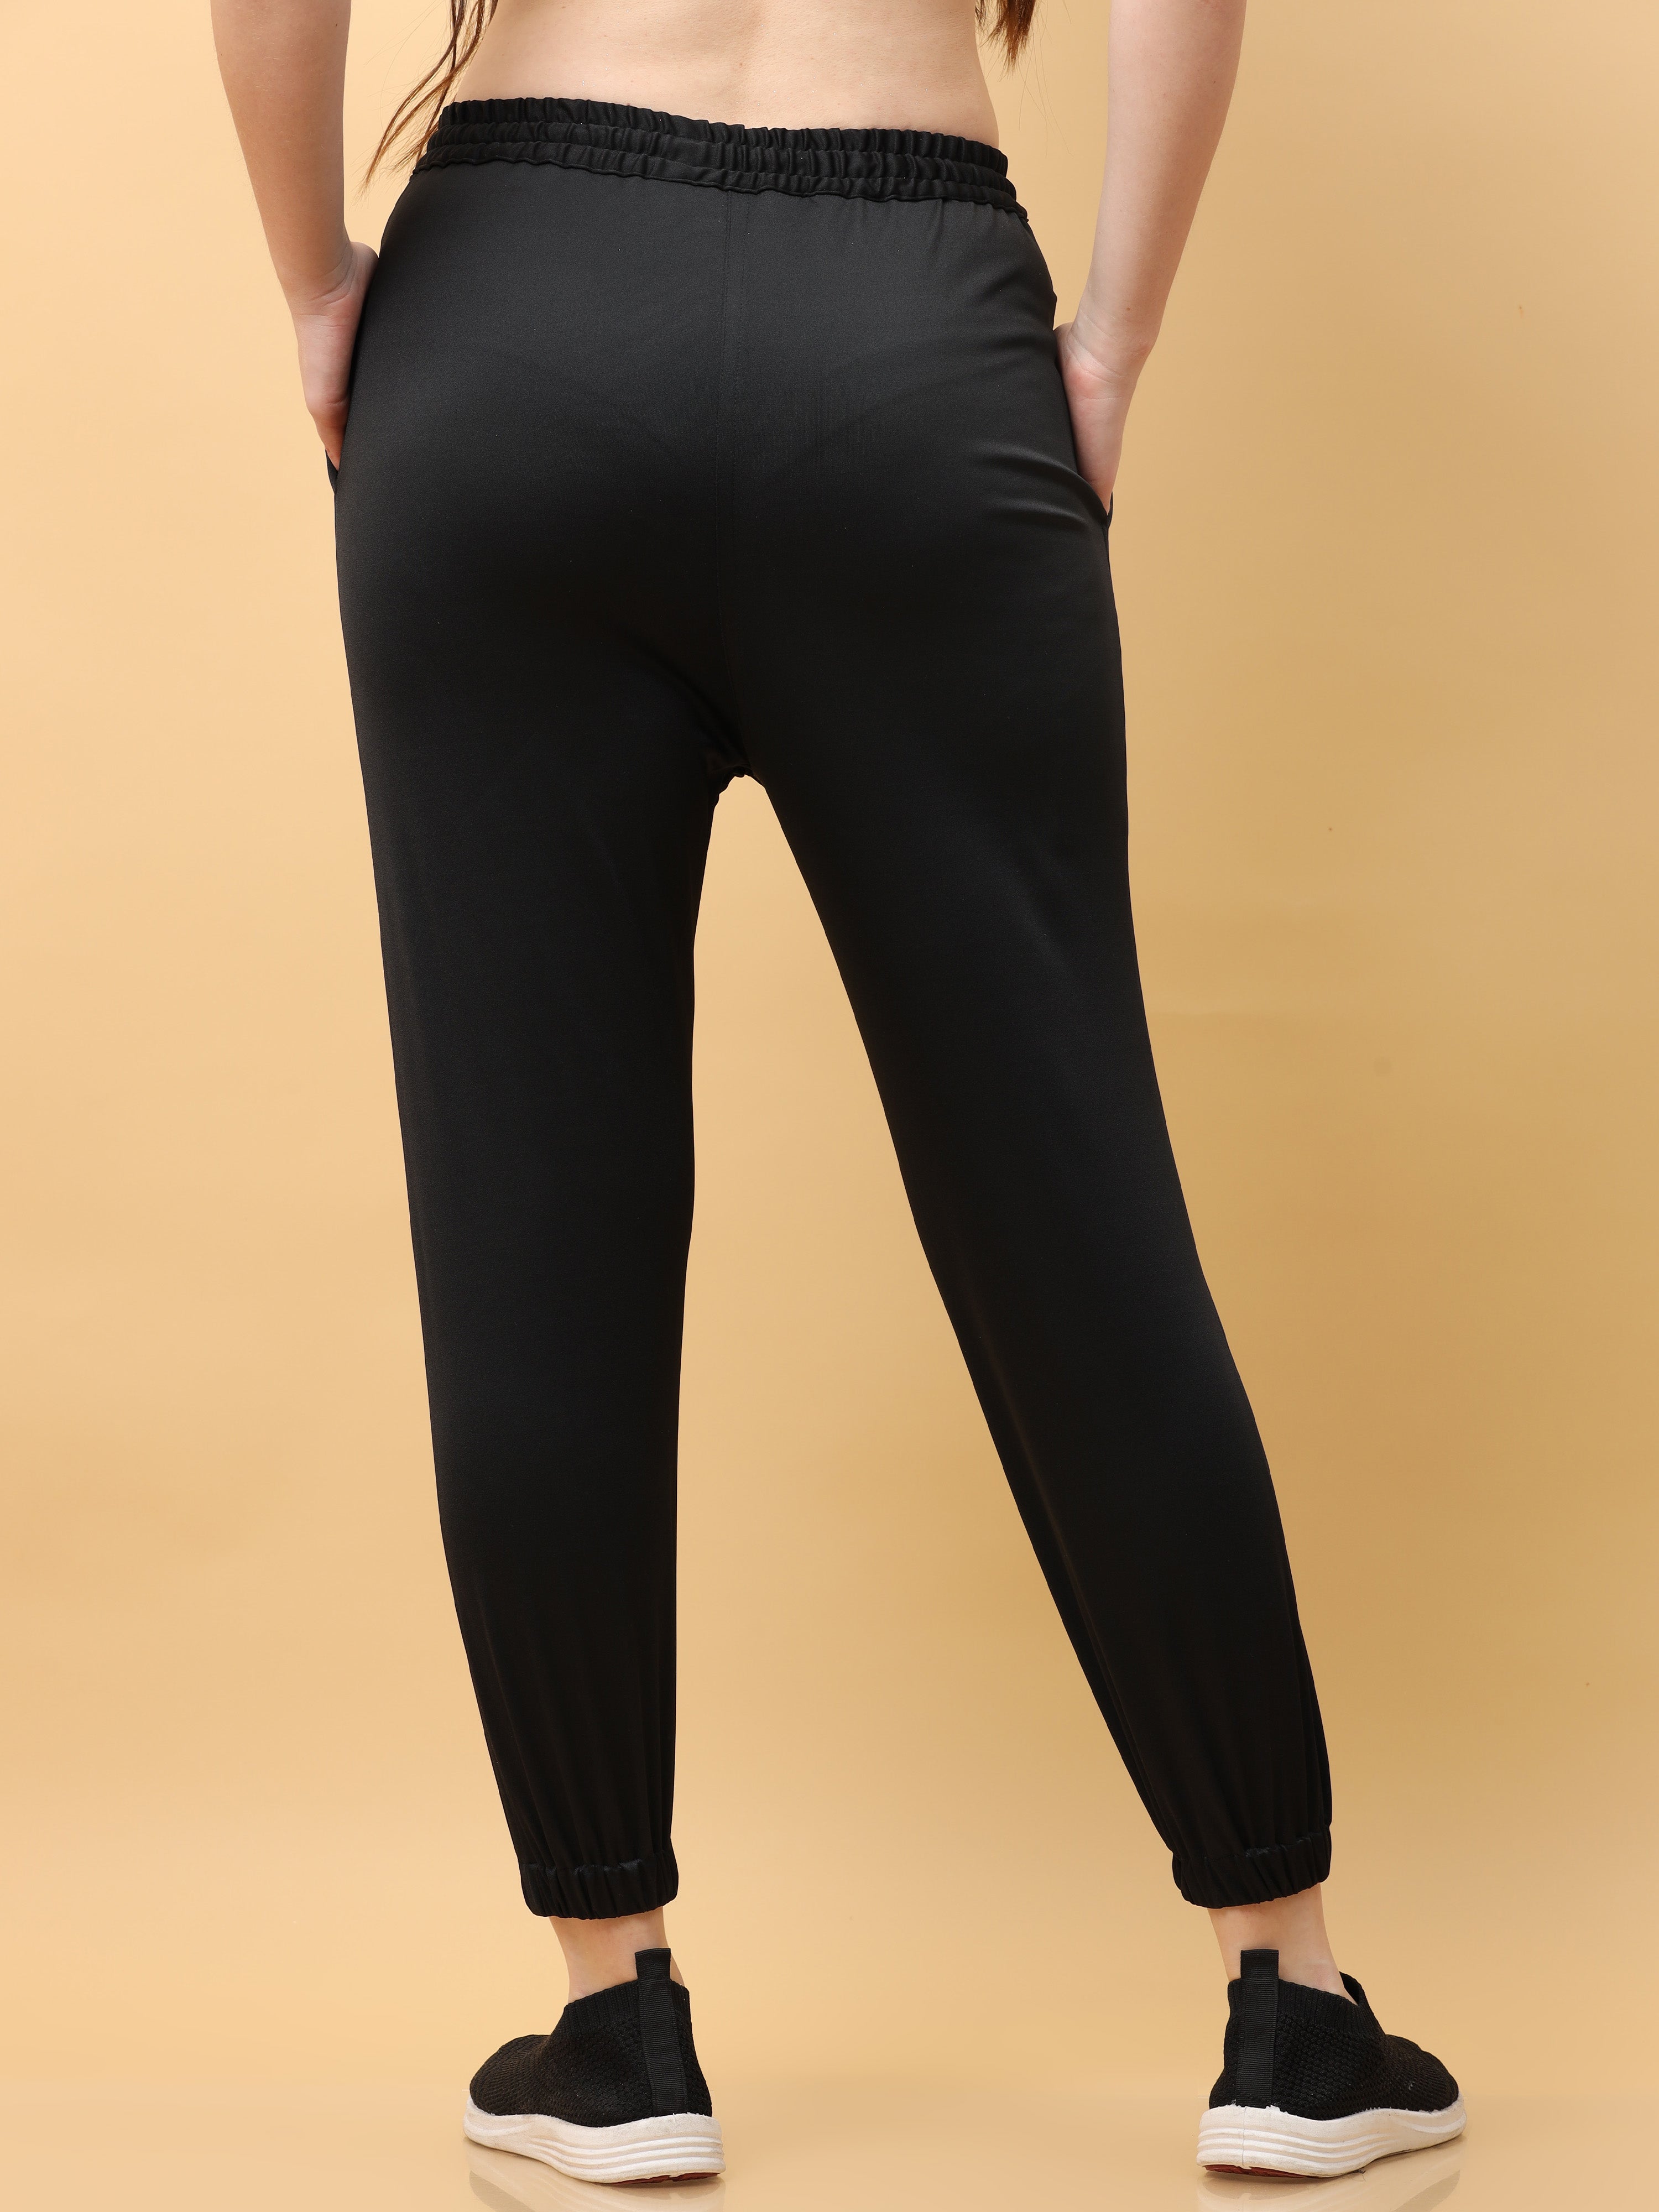 jogger  Lower and Trouser for girls  stretchable with elasticated waist Black  women Pants  Trousers in soft and solid colors